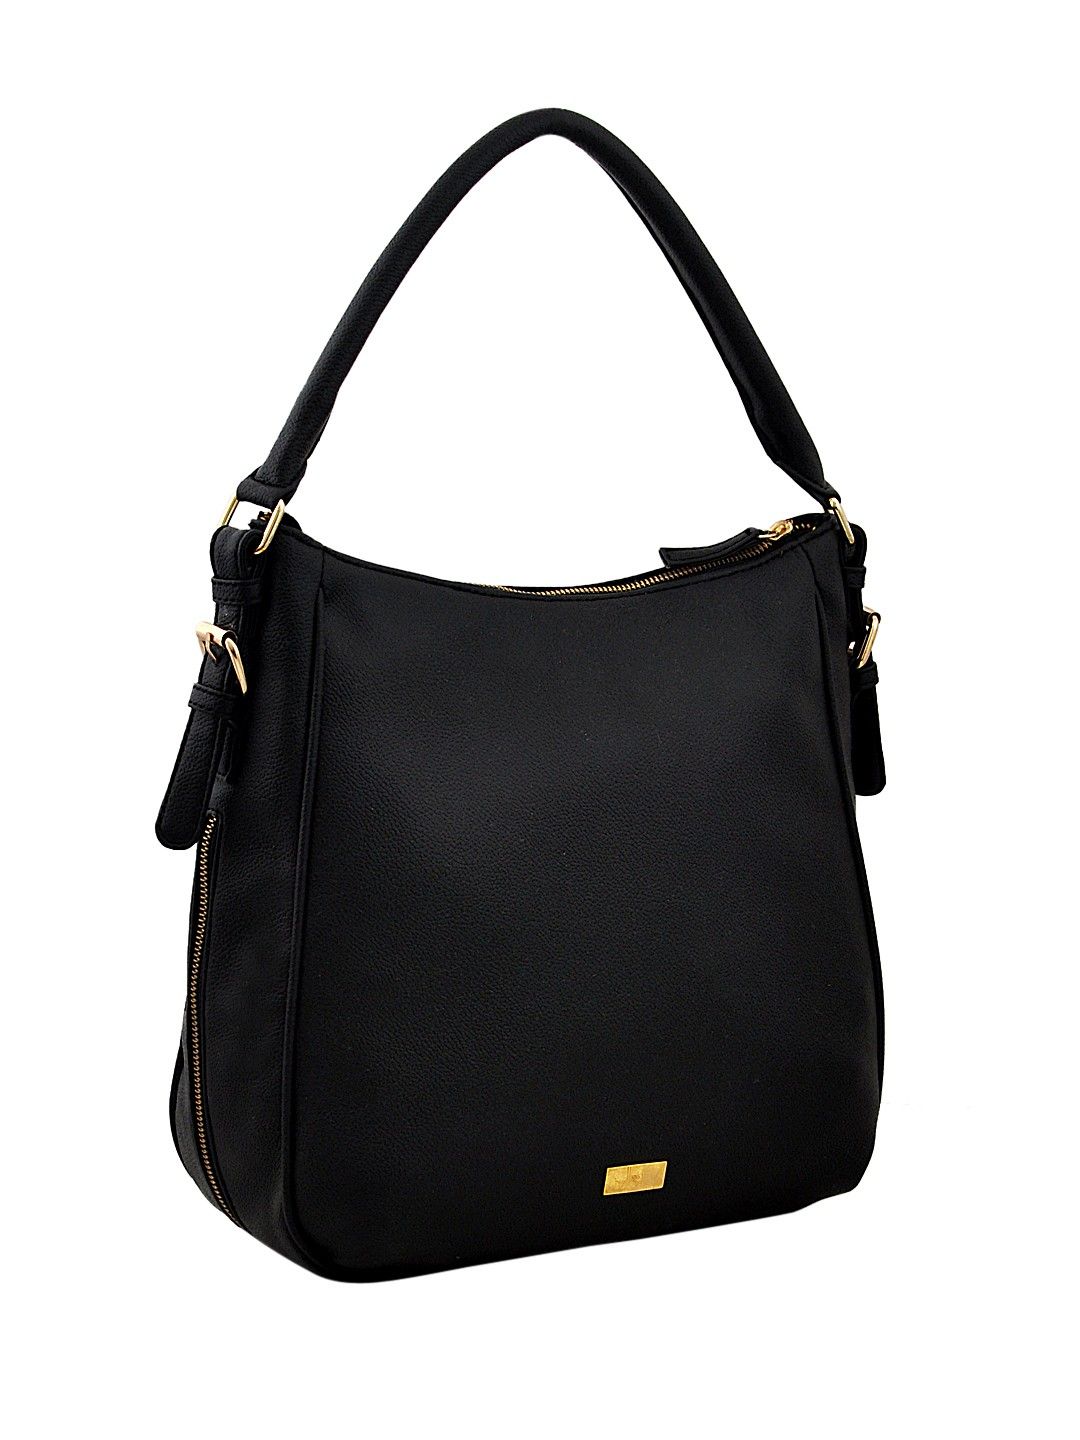 Hobo Bags for Women Faux Leather Shoulder - black | Leather, Bags, Hobo  crossbody bag